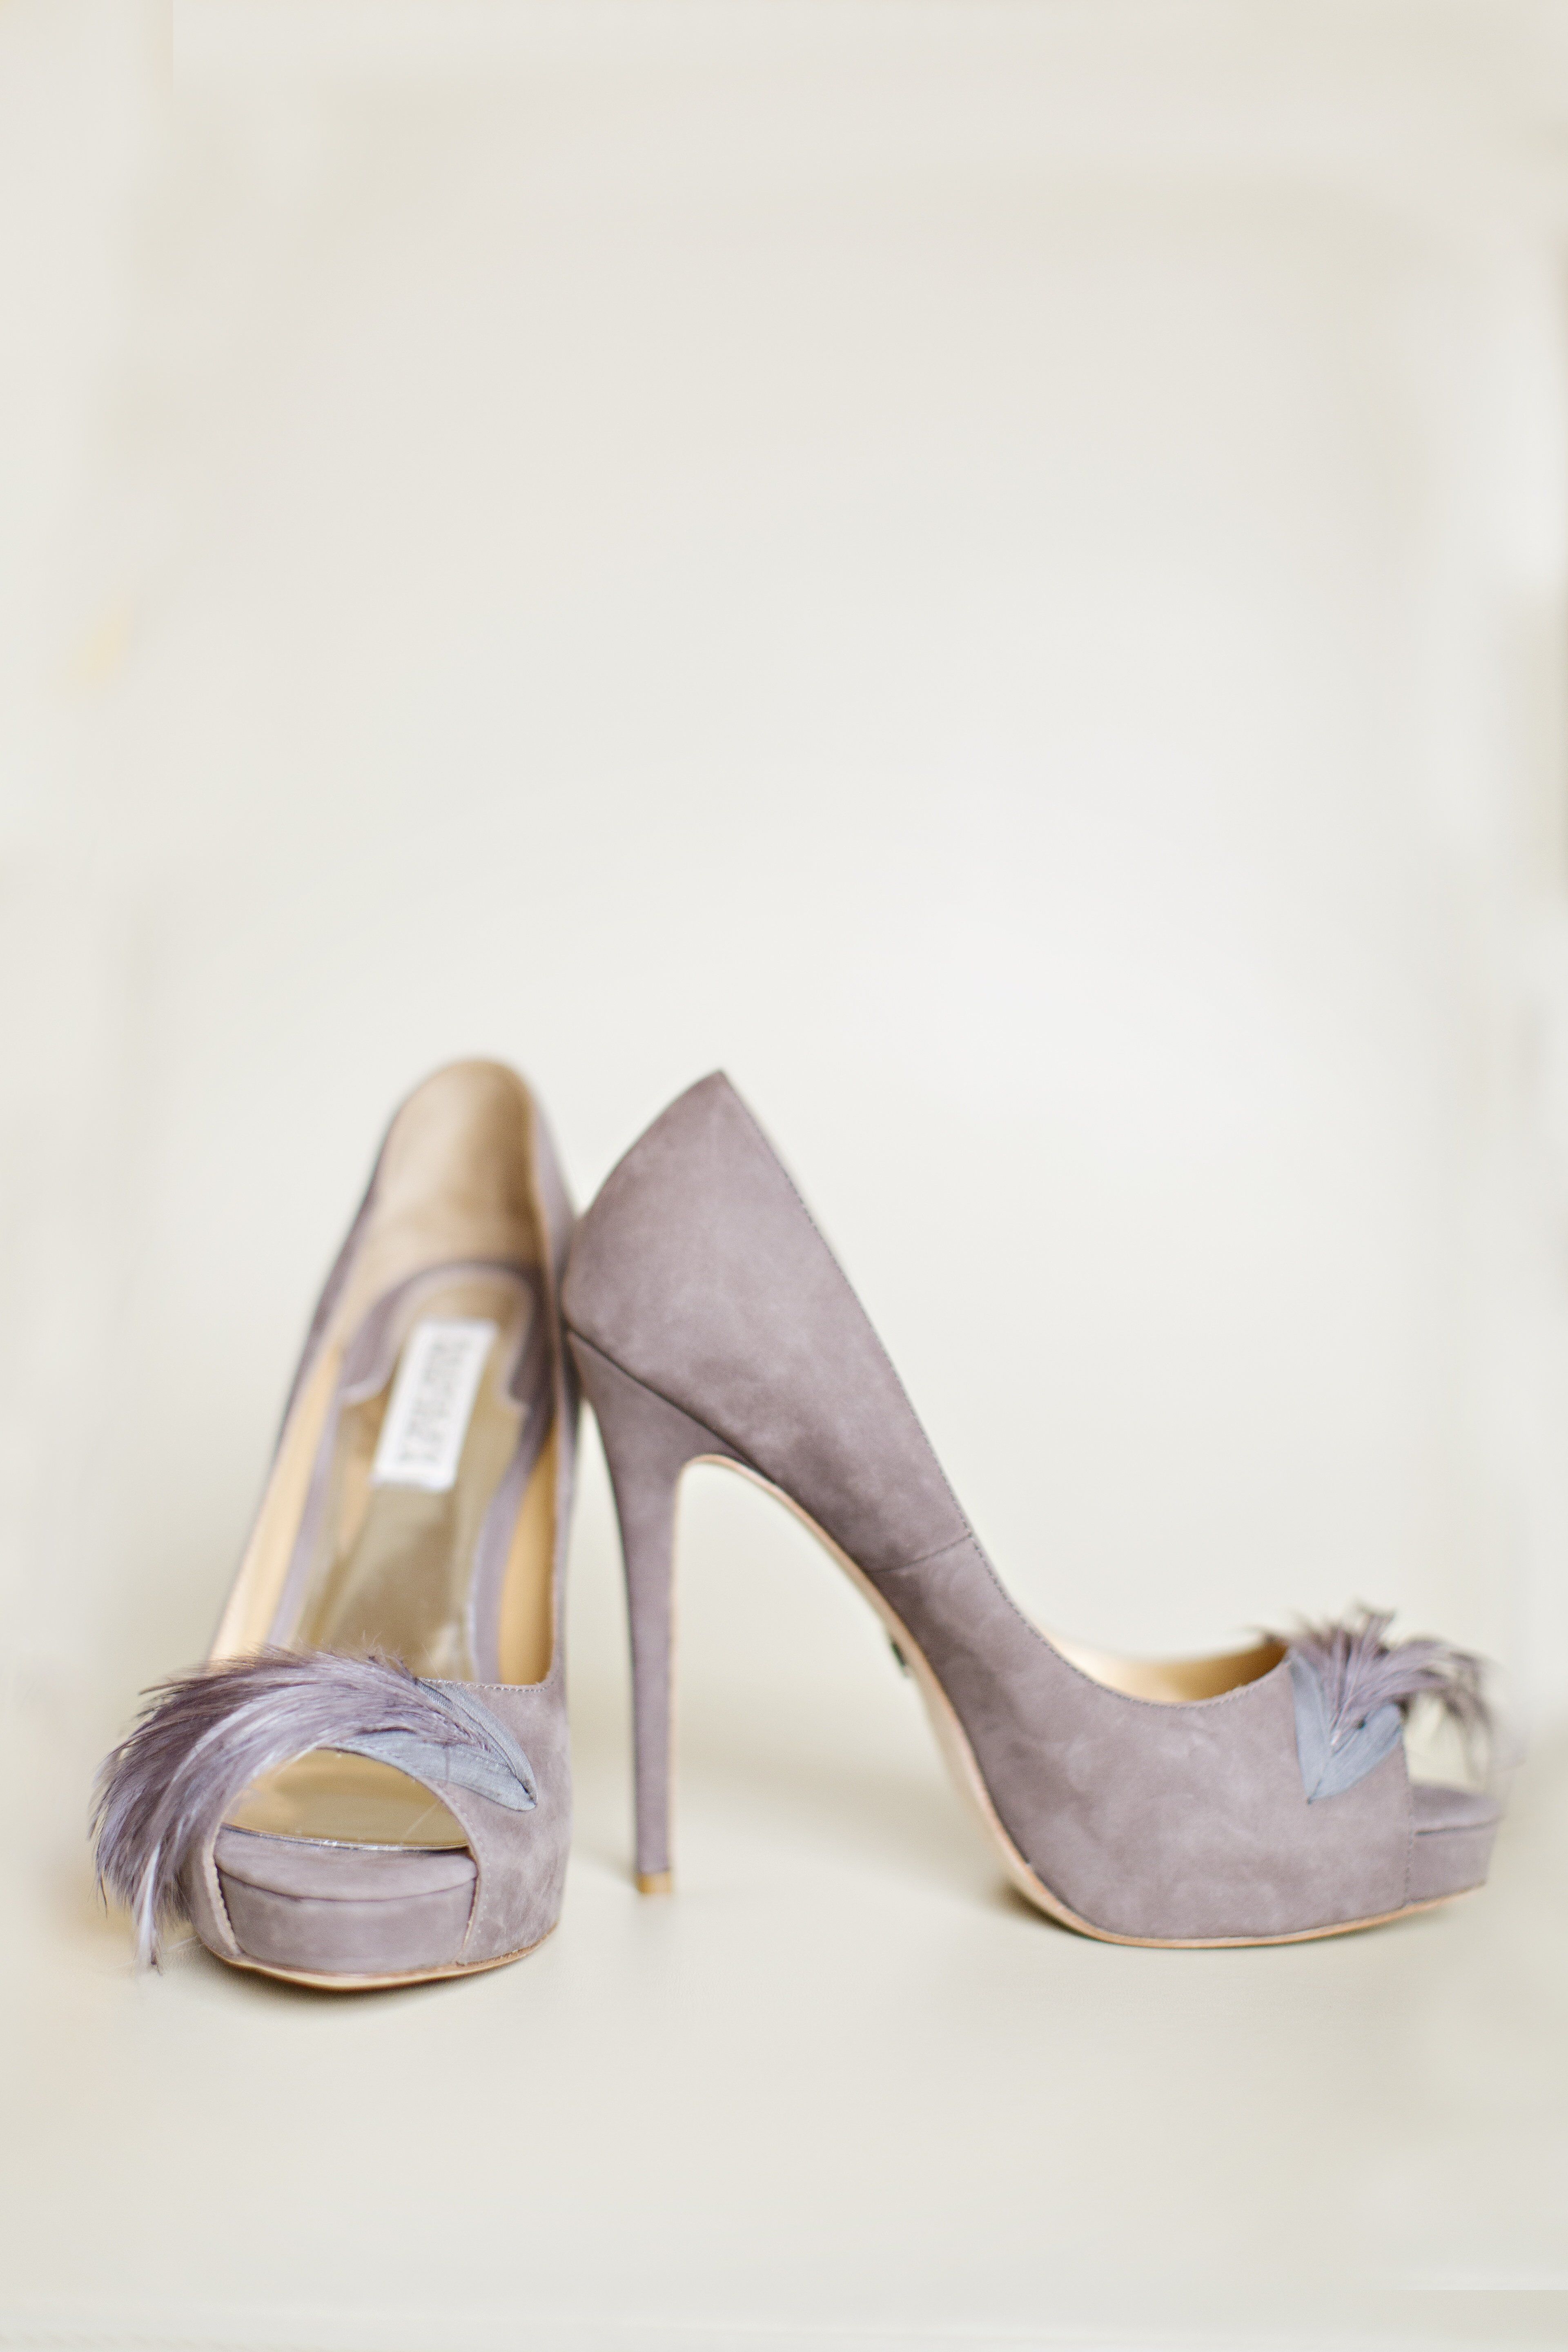 feather bridal shoes